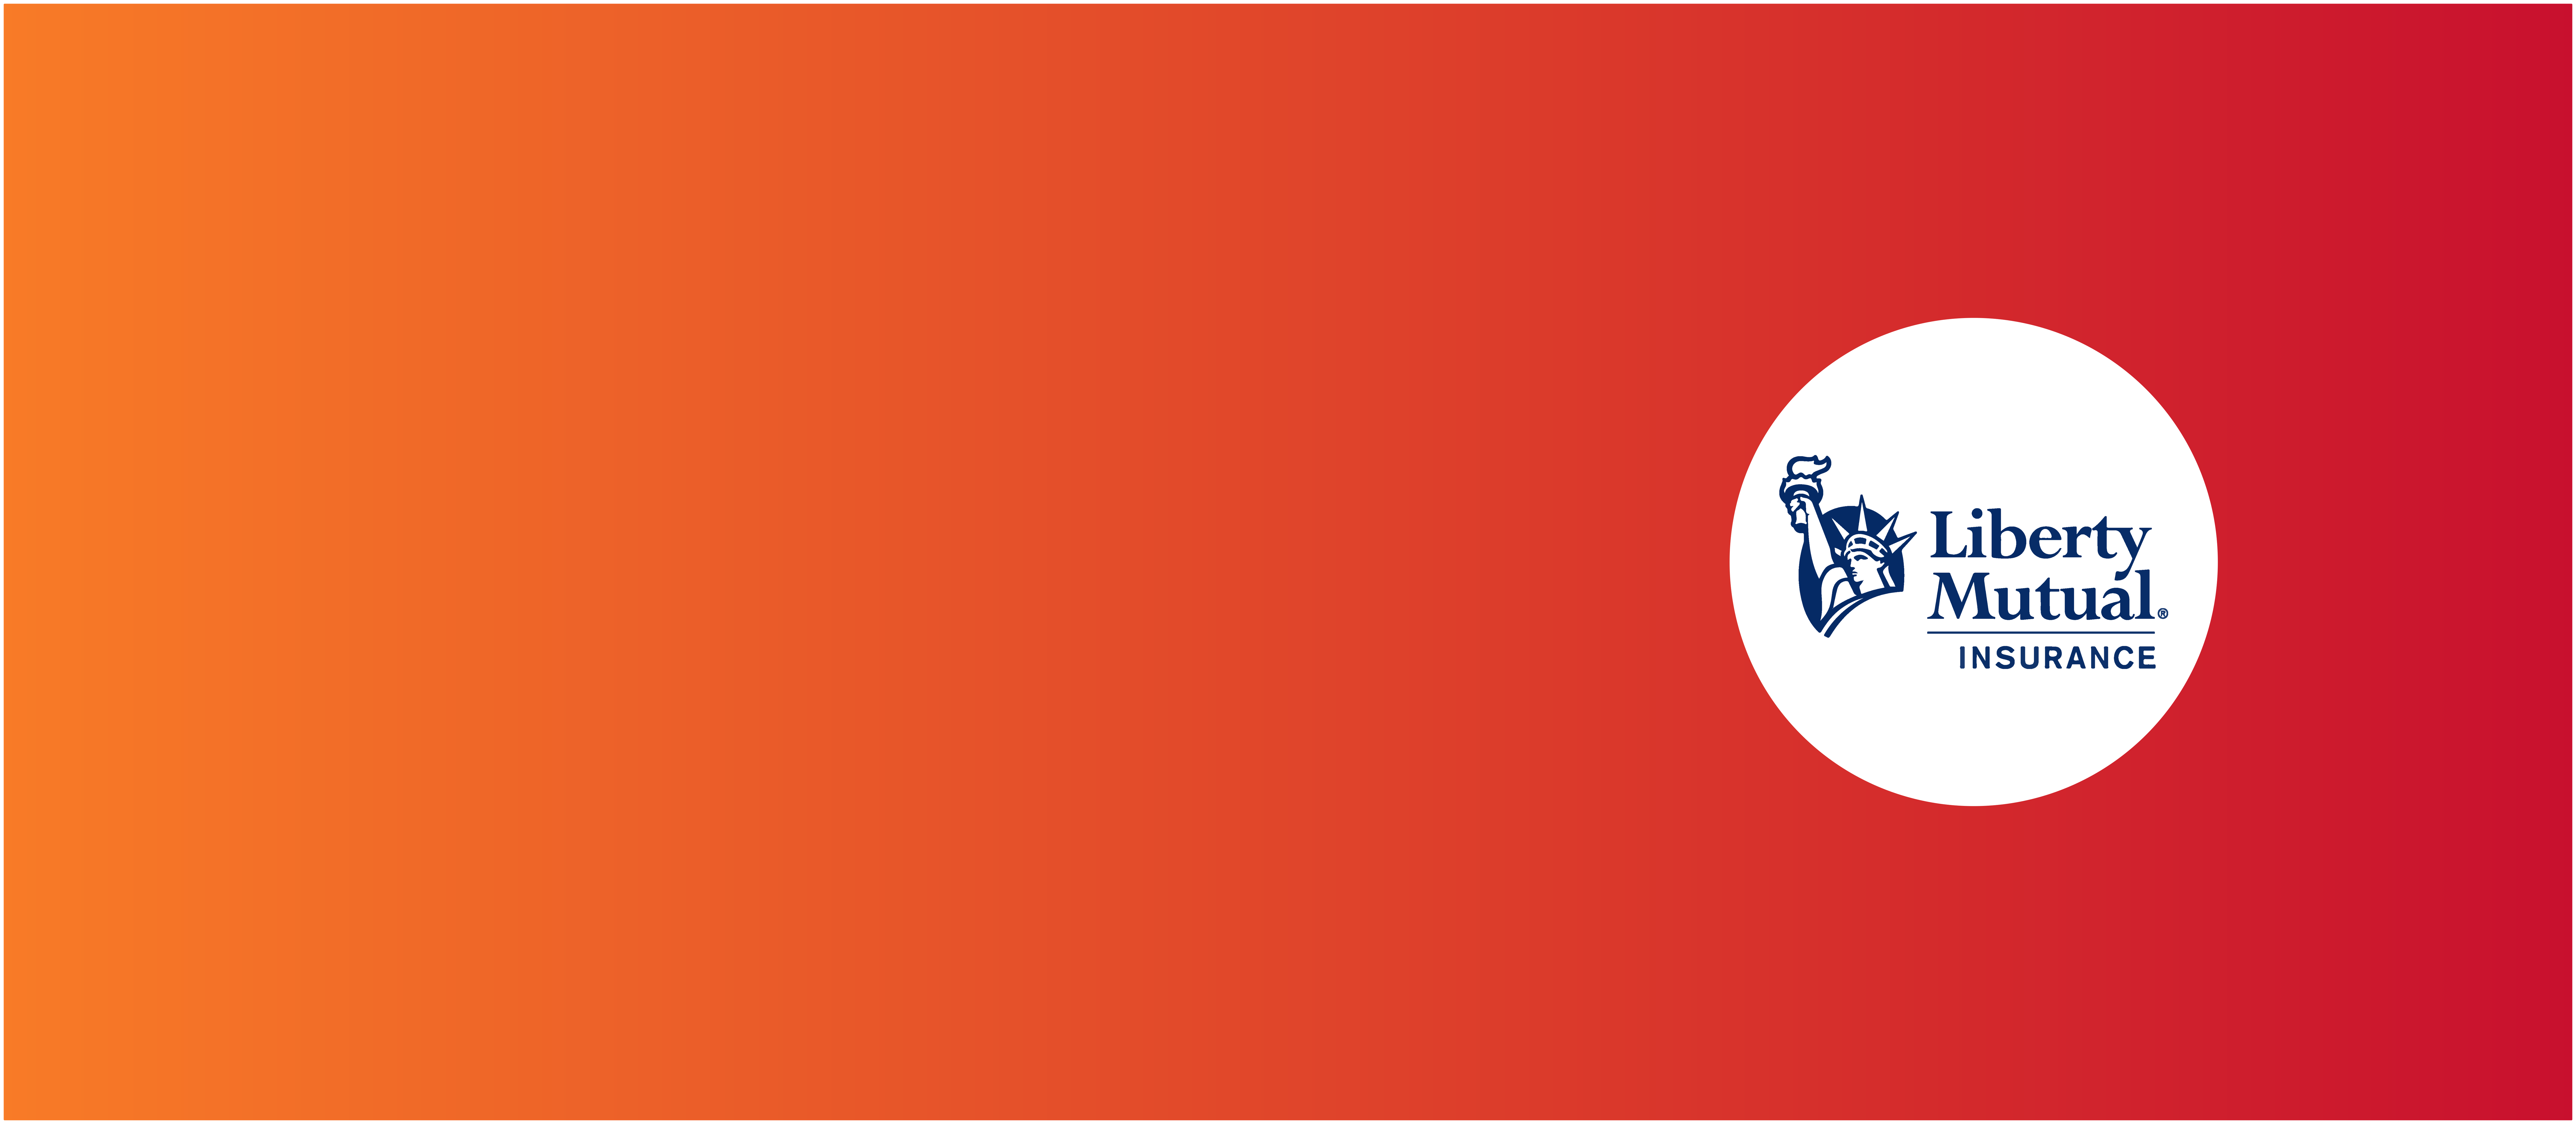 Orange and red background with Liberty Mutual Insurance Logo